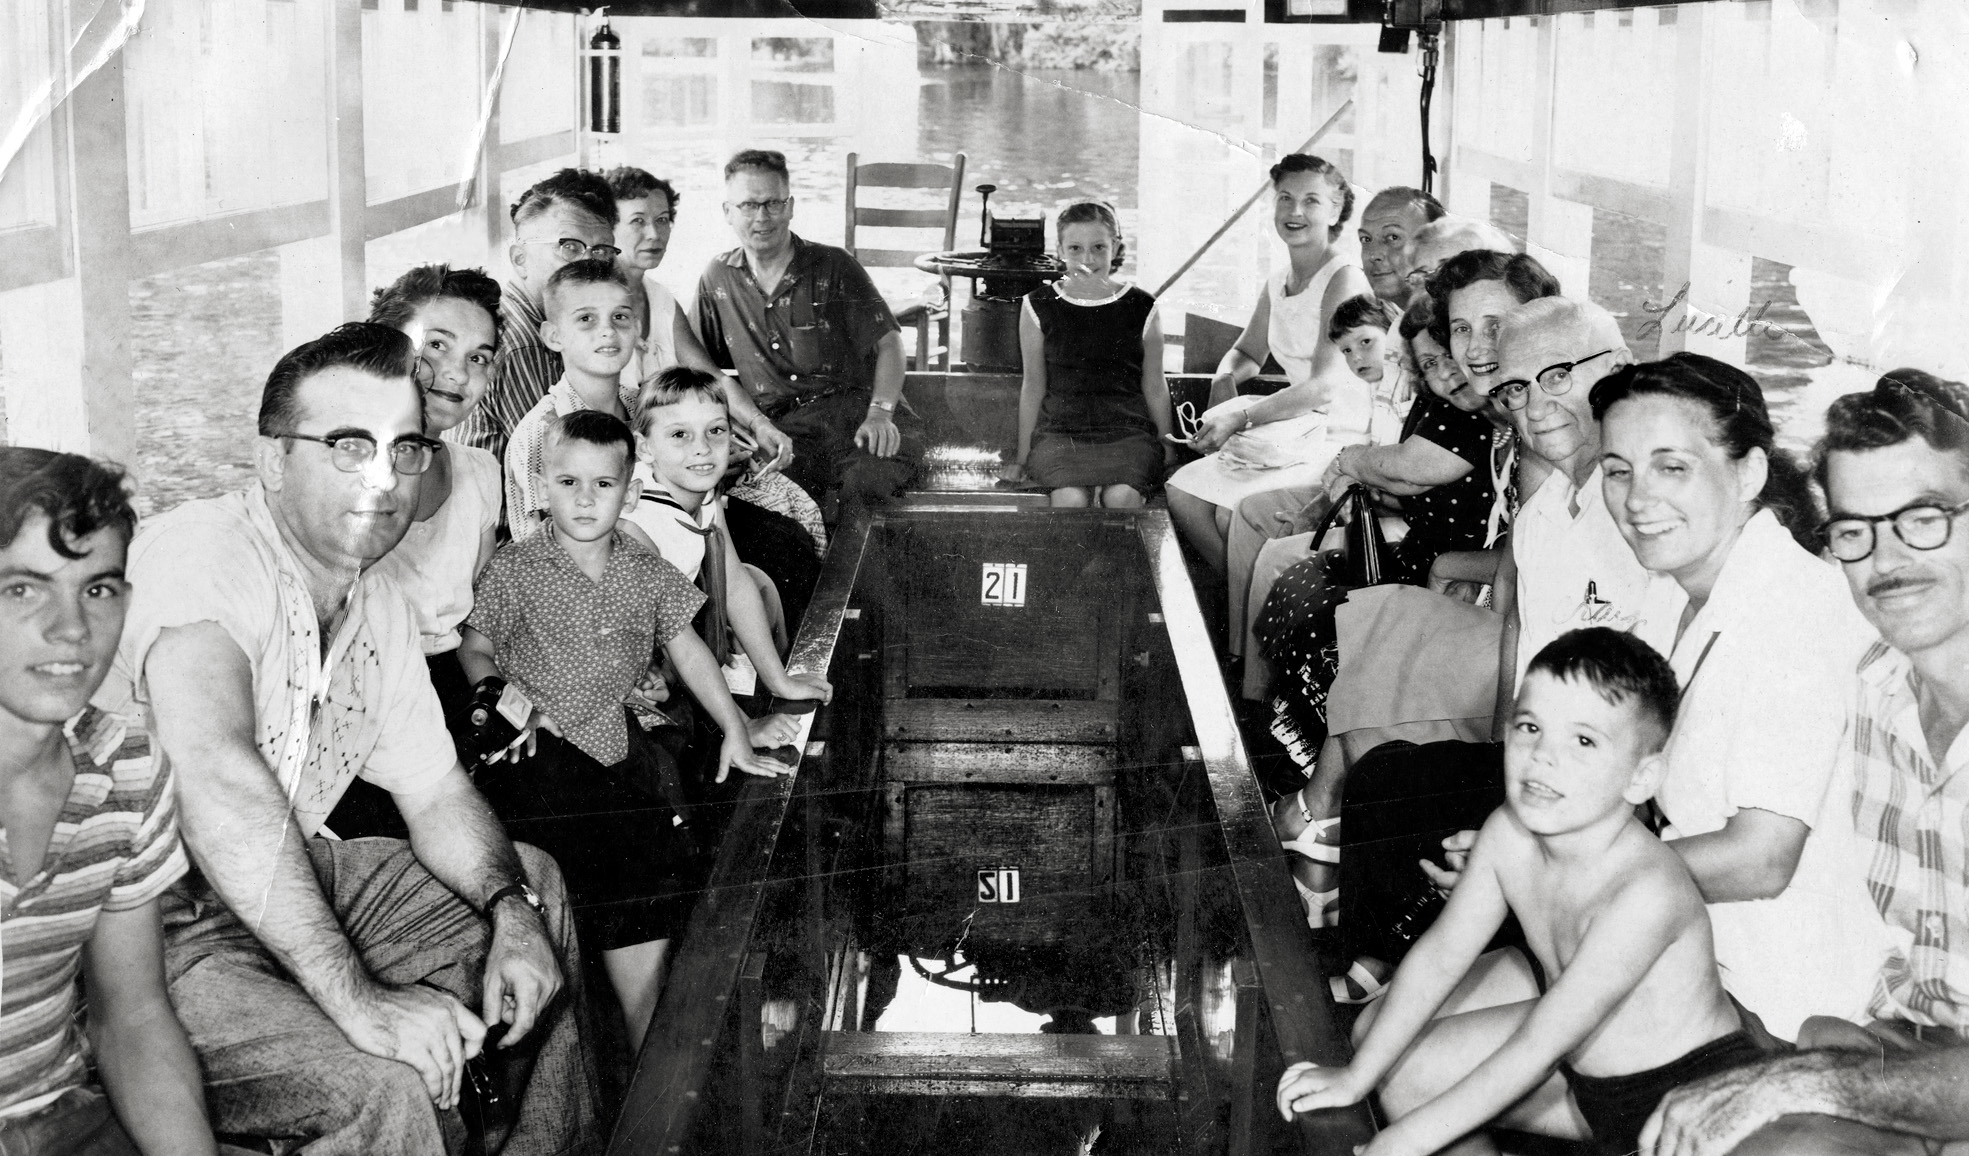 A ride on a glass-bottom boat, Silver Springs State Park, Florida, 1958. I'm on the right sitting between my mom and dad, my older brother at the far left. This is a souvenir photo that was made available for purchase. Later that week my dad splurged on a roll of Kodacolor for our visit to Cypress Gardens. View full size.